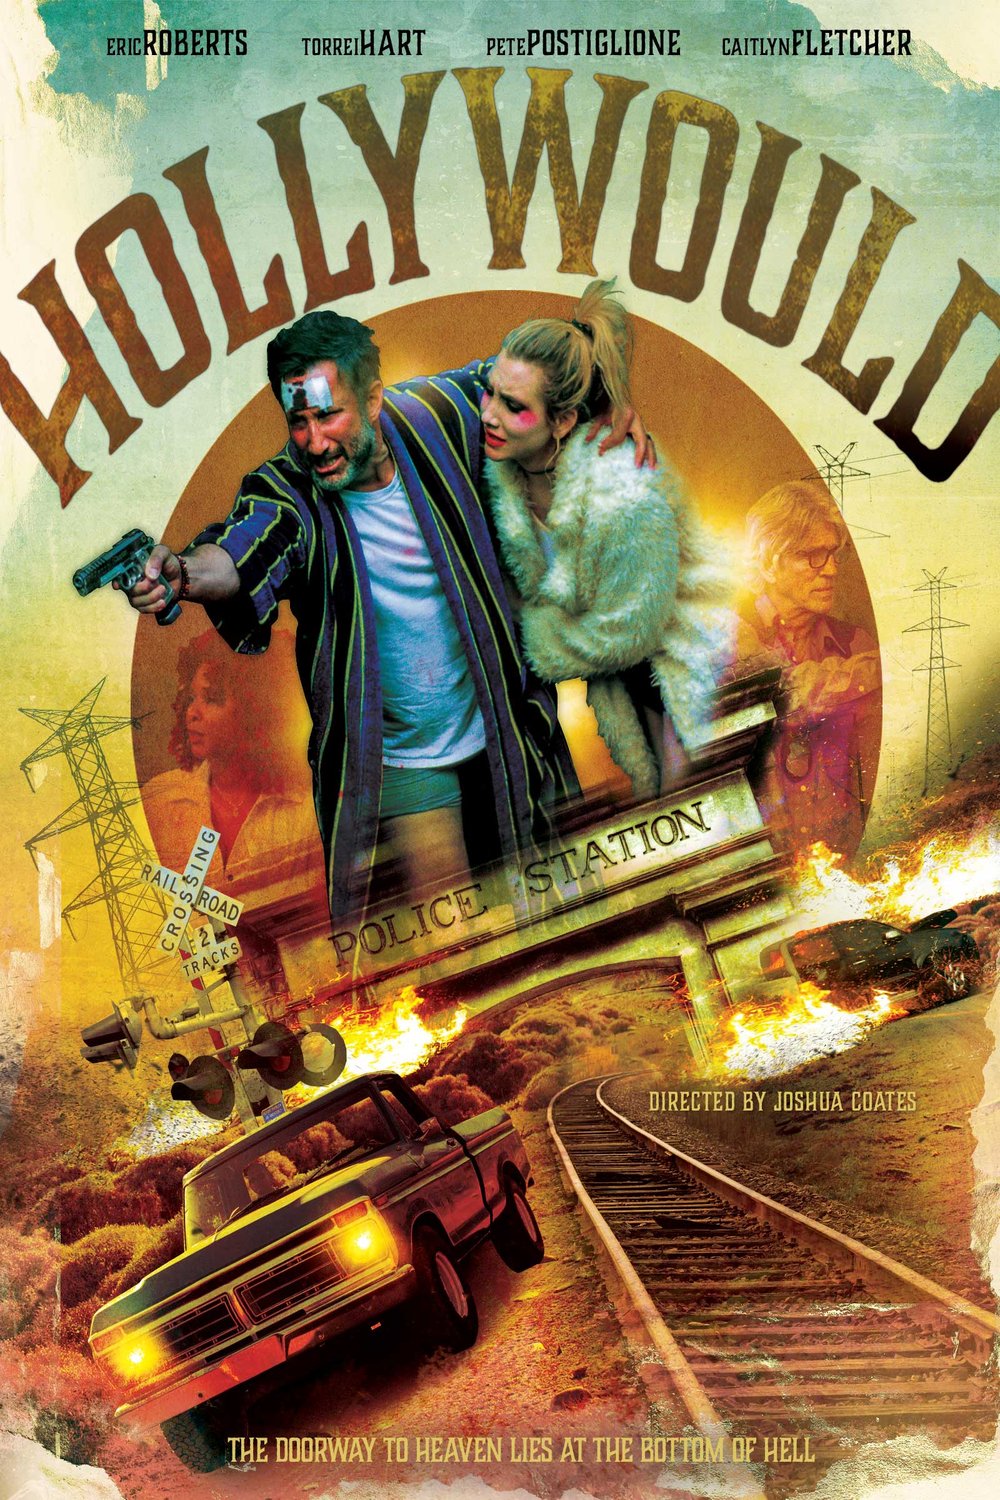 Poster of the movie Hollywould